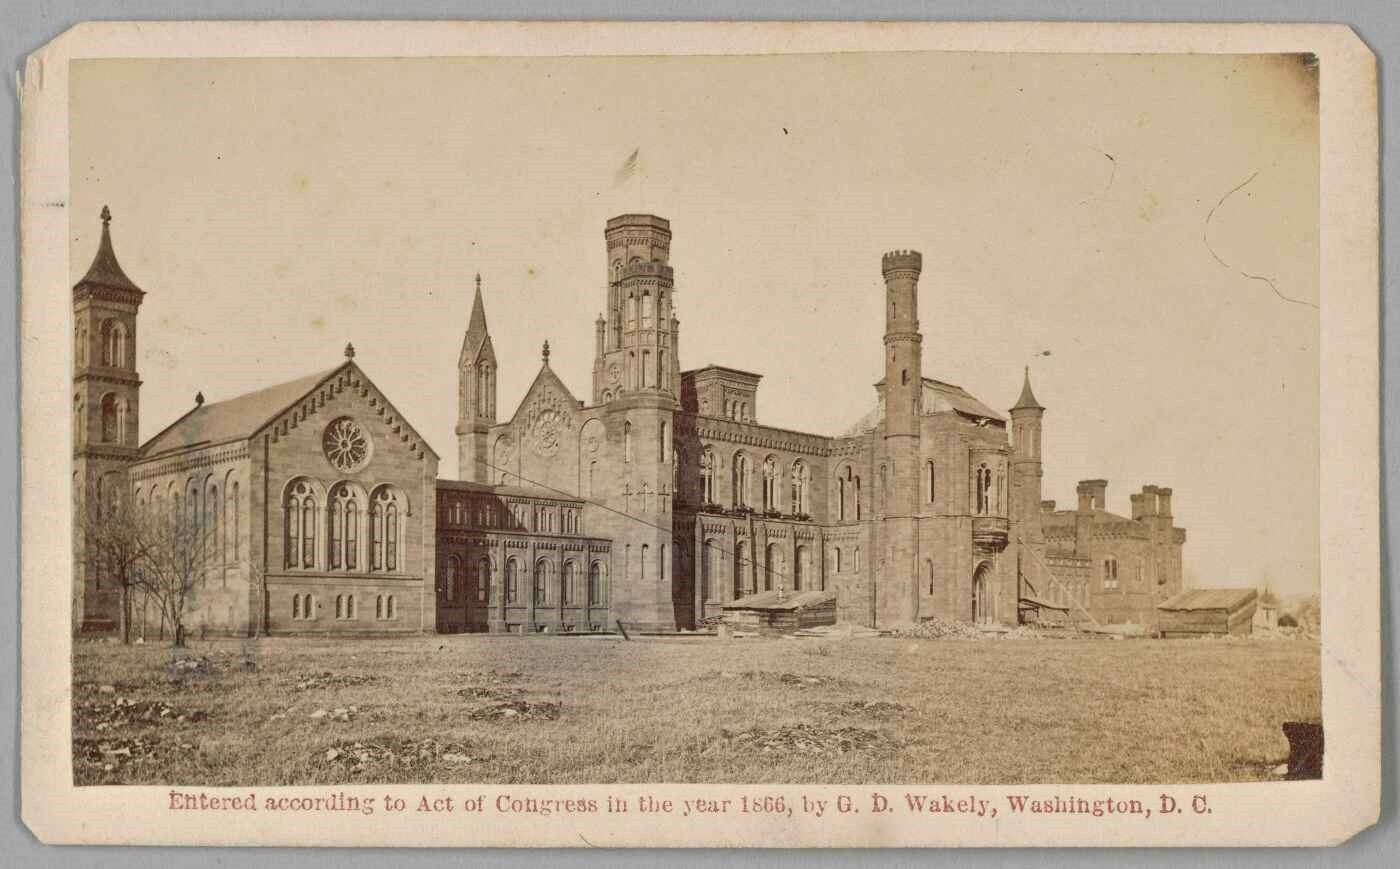 This carte-de-visite depicts the Smithsonian Castle building photographed showing a southwest view. The building is surrounded by rocky and grassy soil with one small bare-branched tree in the left foreground.